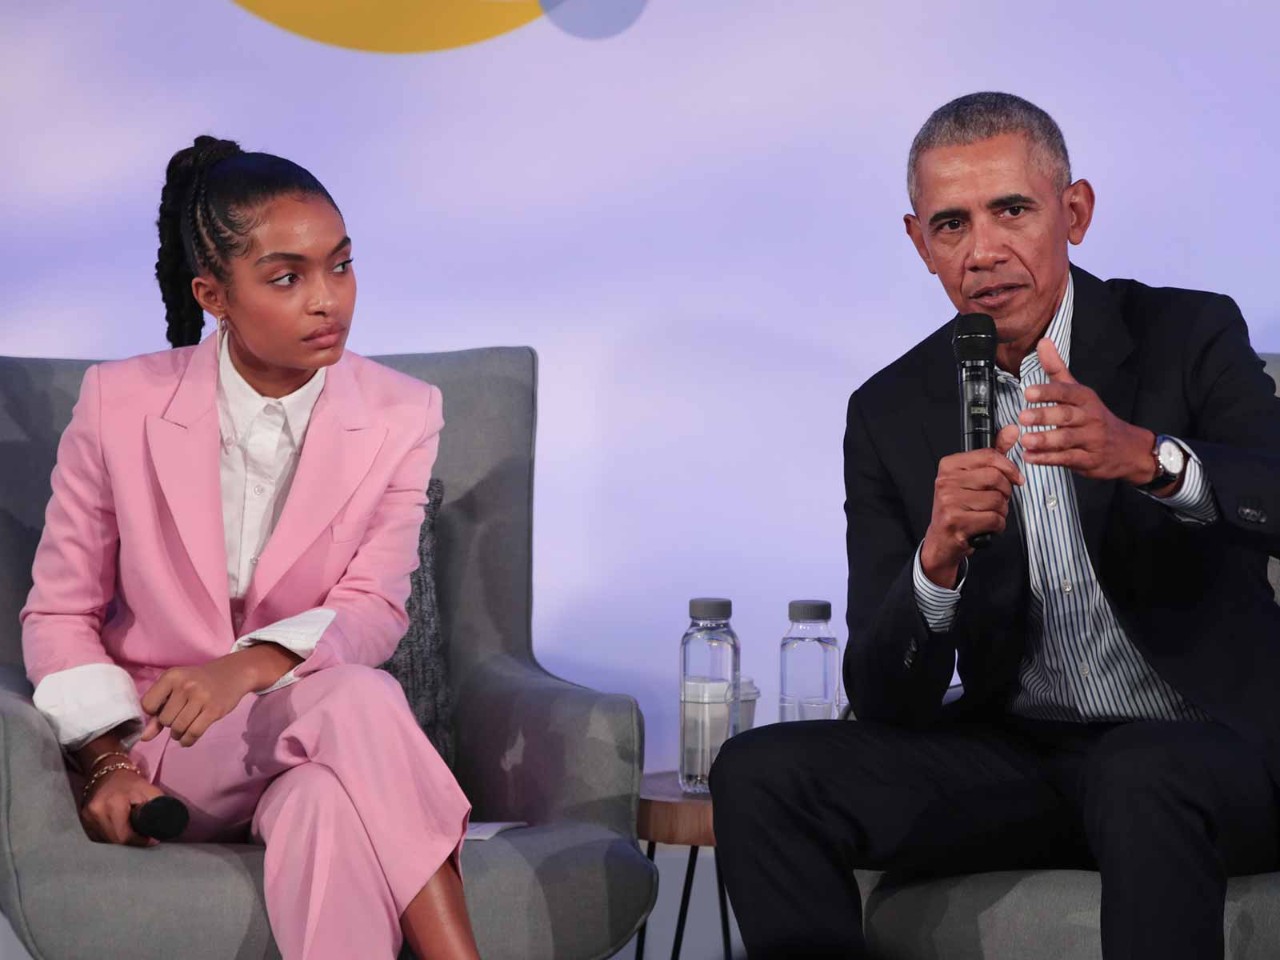 Barack Obama and actress Yara Shahidi speak at the Obama Foundation Summit in 2019 in a session 'Disruption: How Gen Z is taking control'